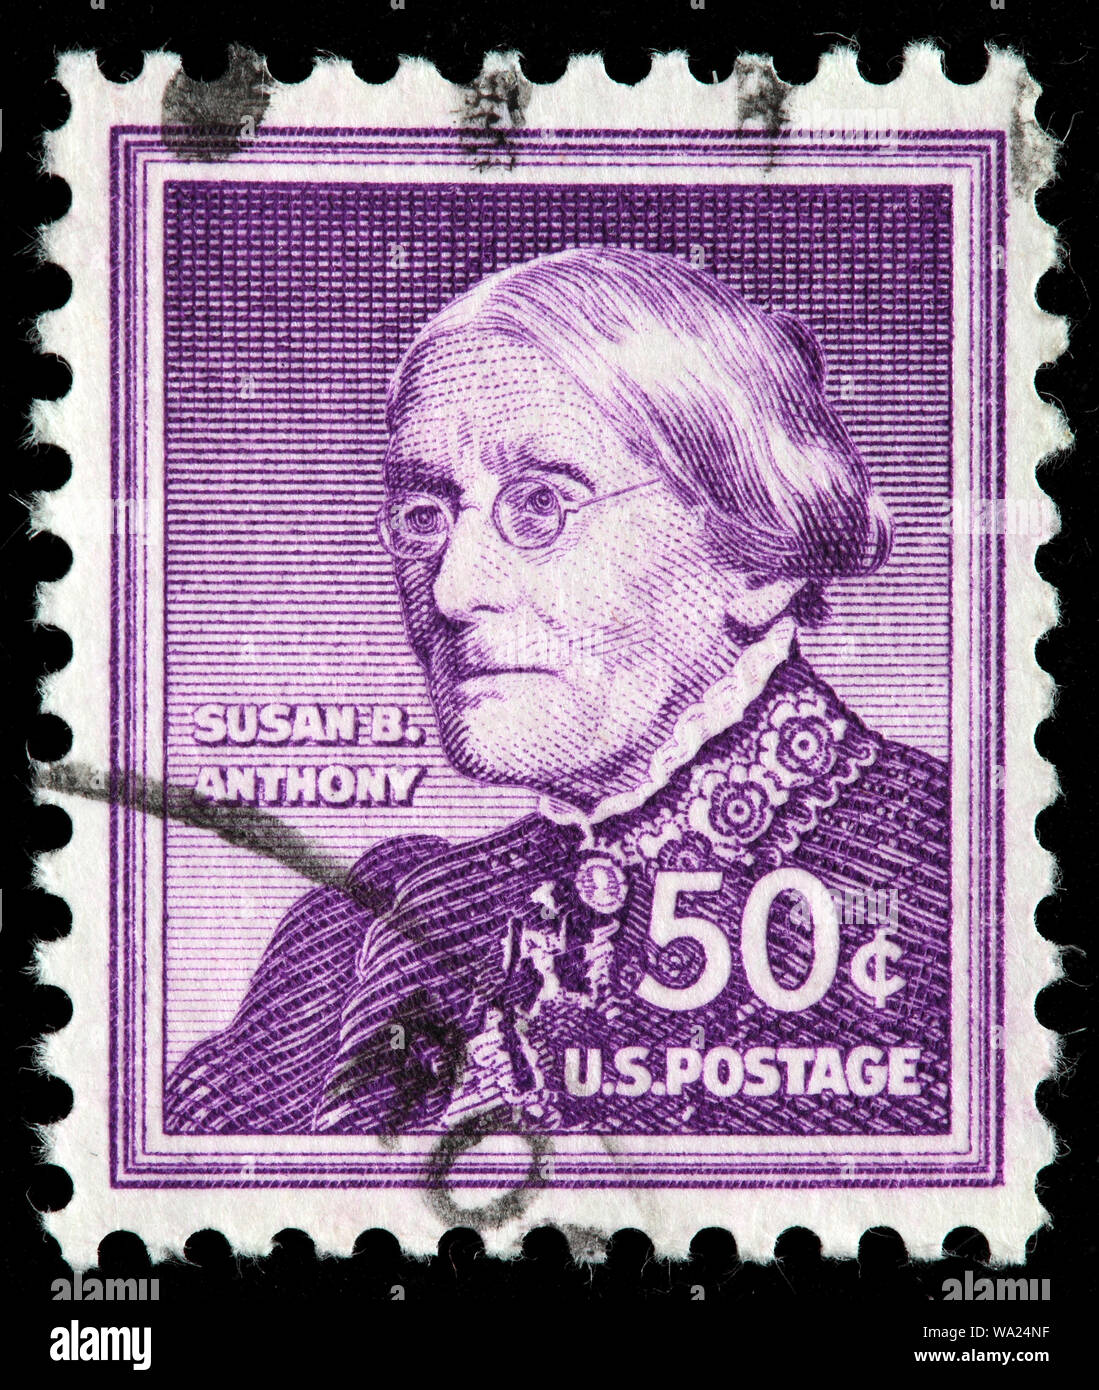 Susan B. Anthony (1820-1906), Women's rights activist, postage stamp, USA, 1955 Stock Photo